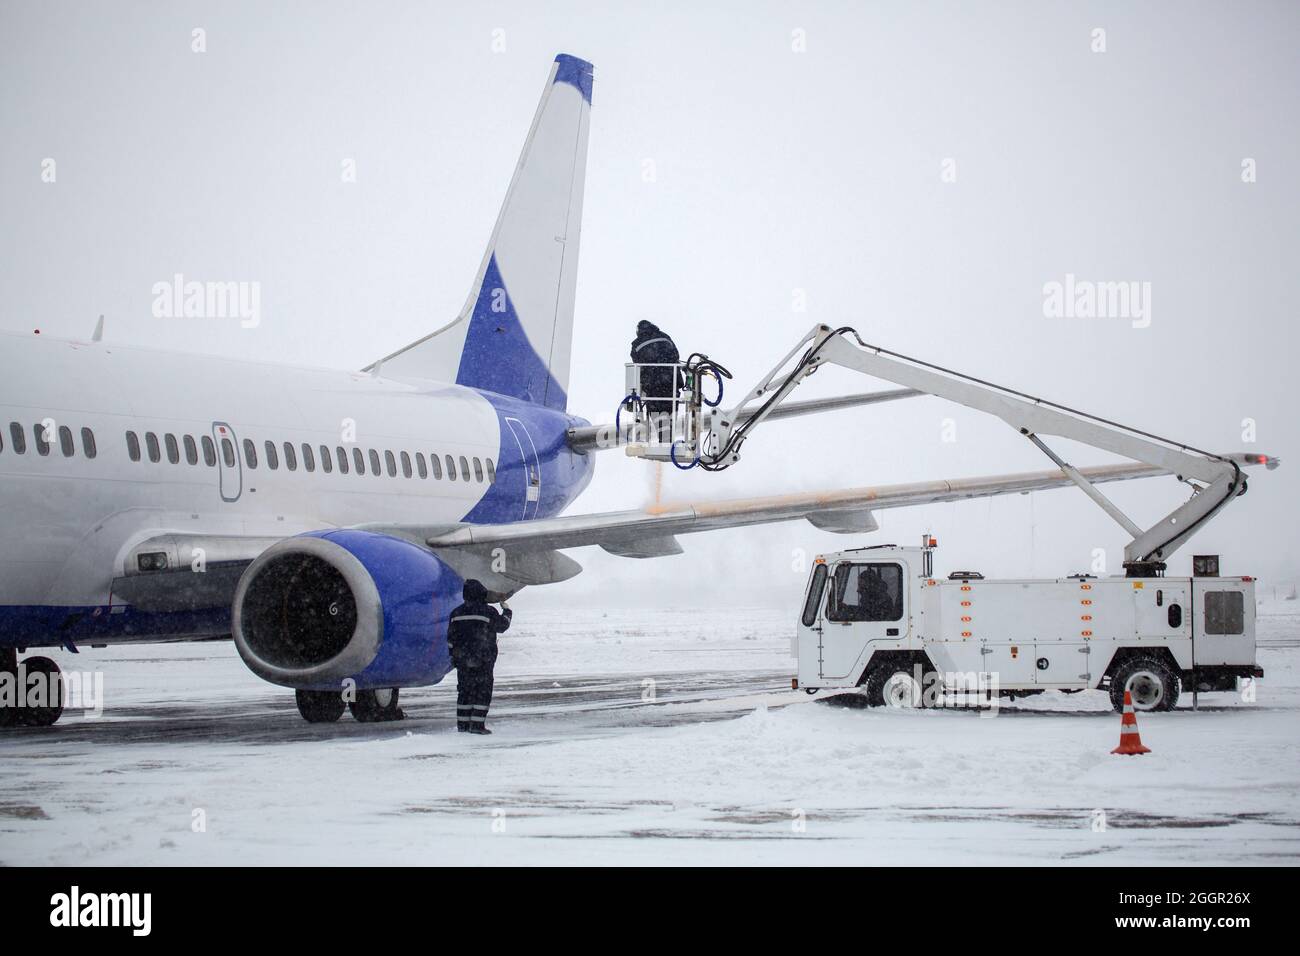 Aircraft handling protection against freezing aircraft. Process of covering passenger airliner with liquid against freezing before departure Stock Photo